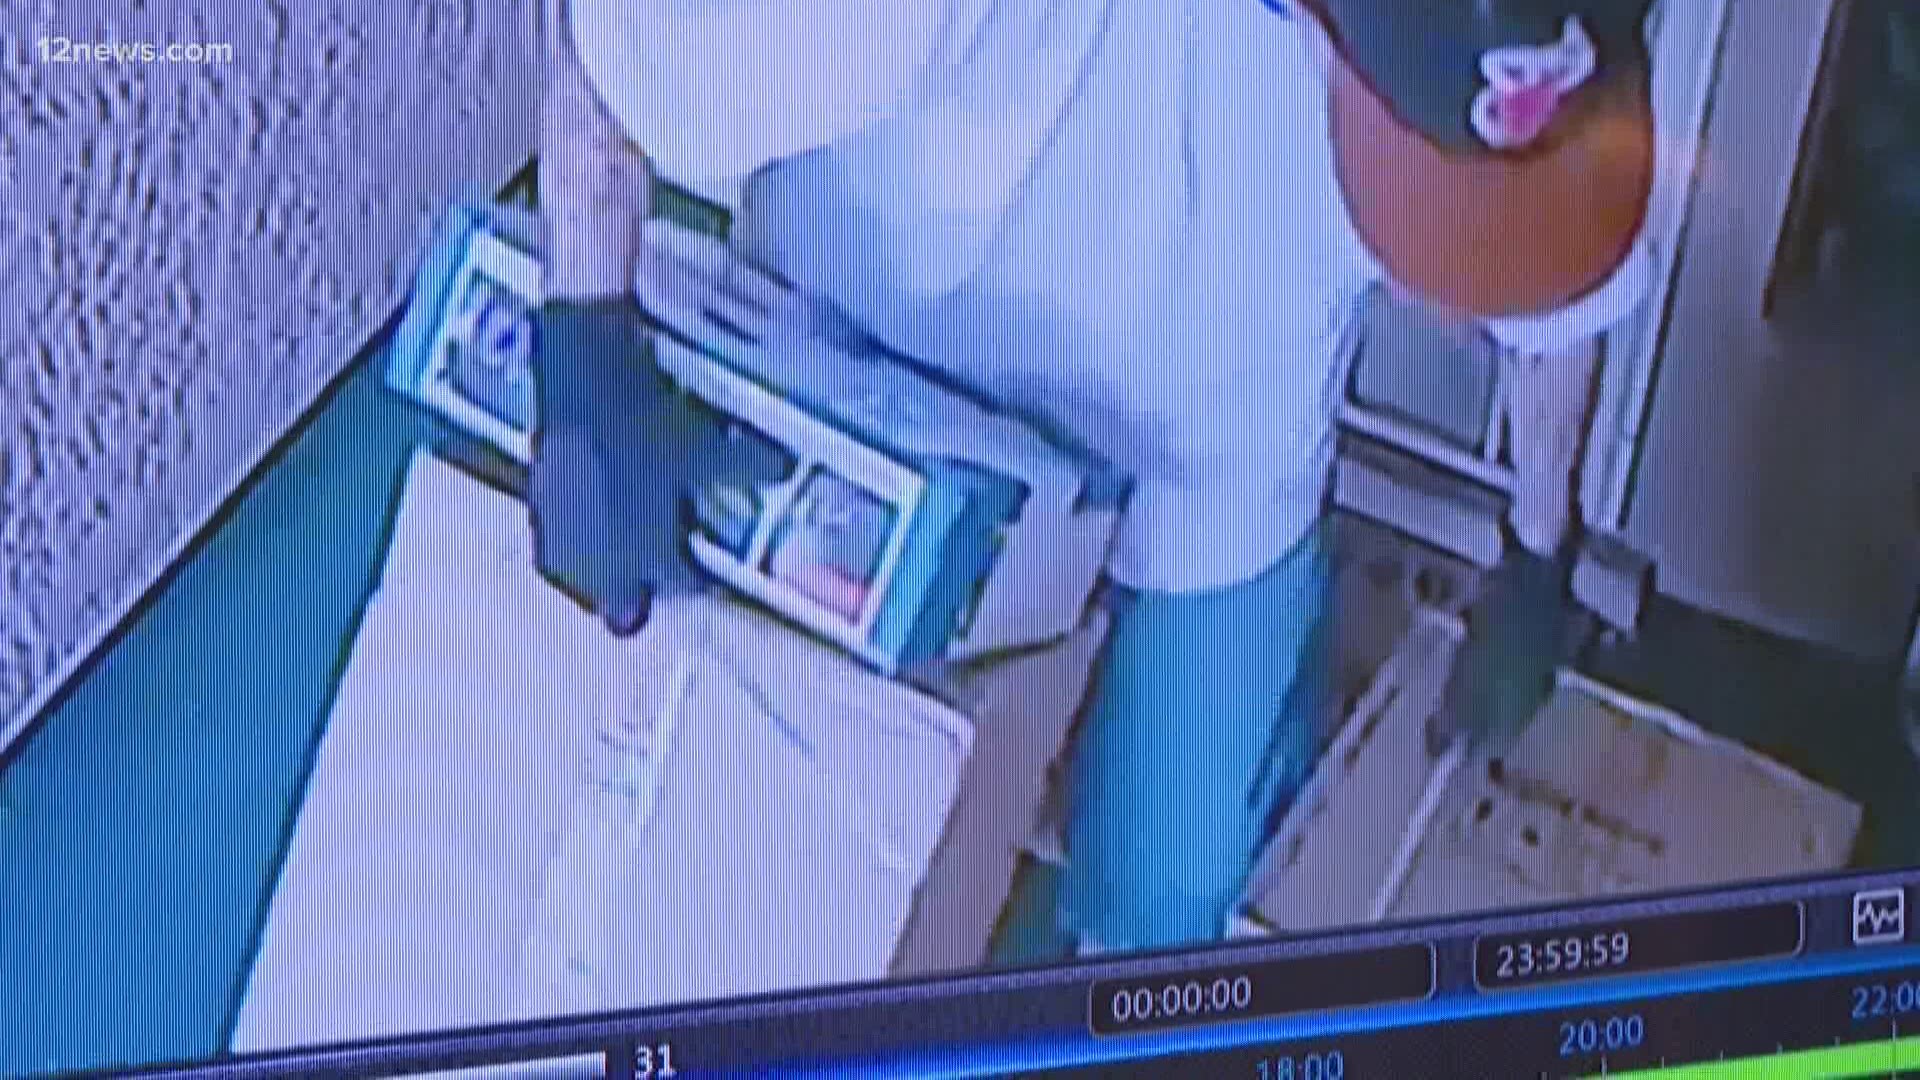 All this week thousands of packages are being shipped and delivered just in time for Christmas, but it's also the prime time for porch pirates.